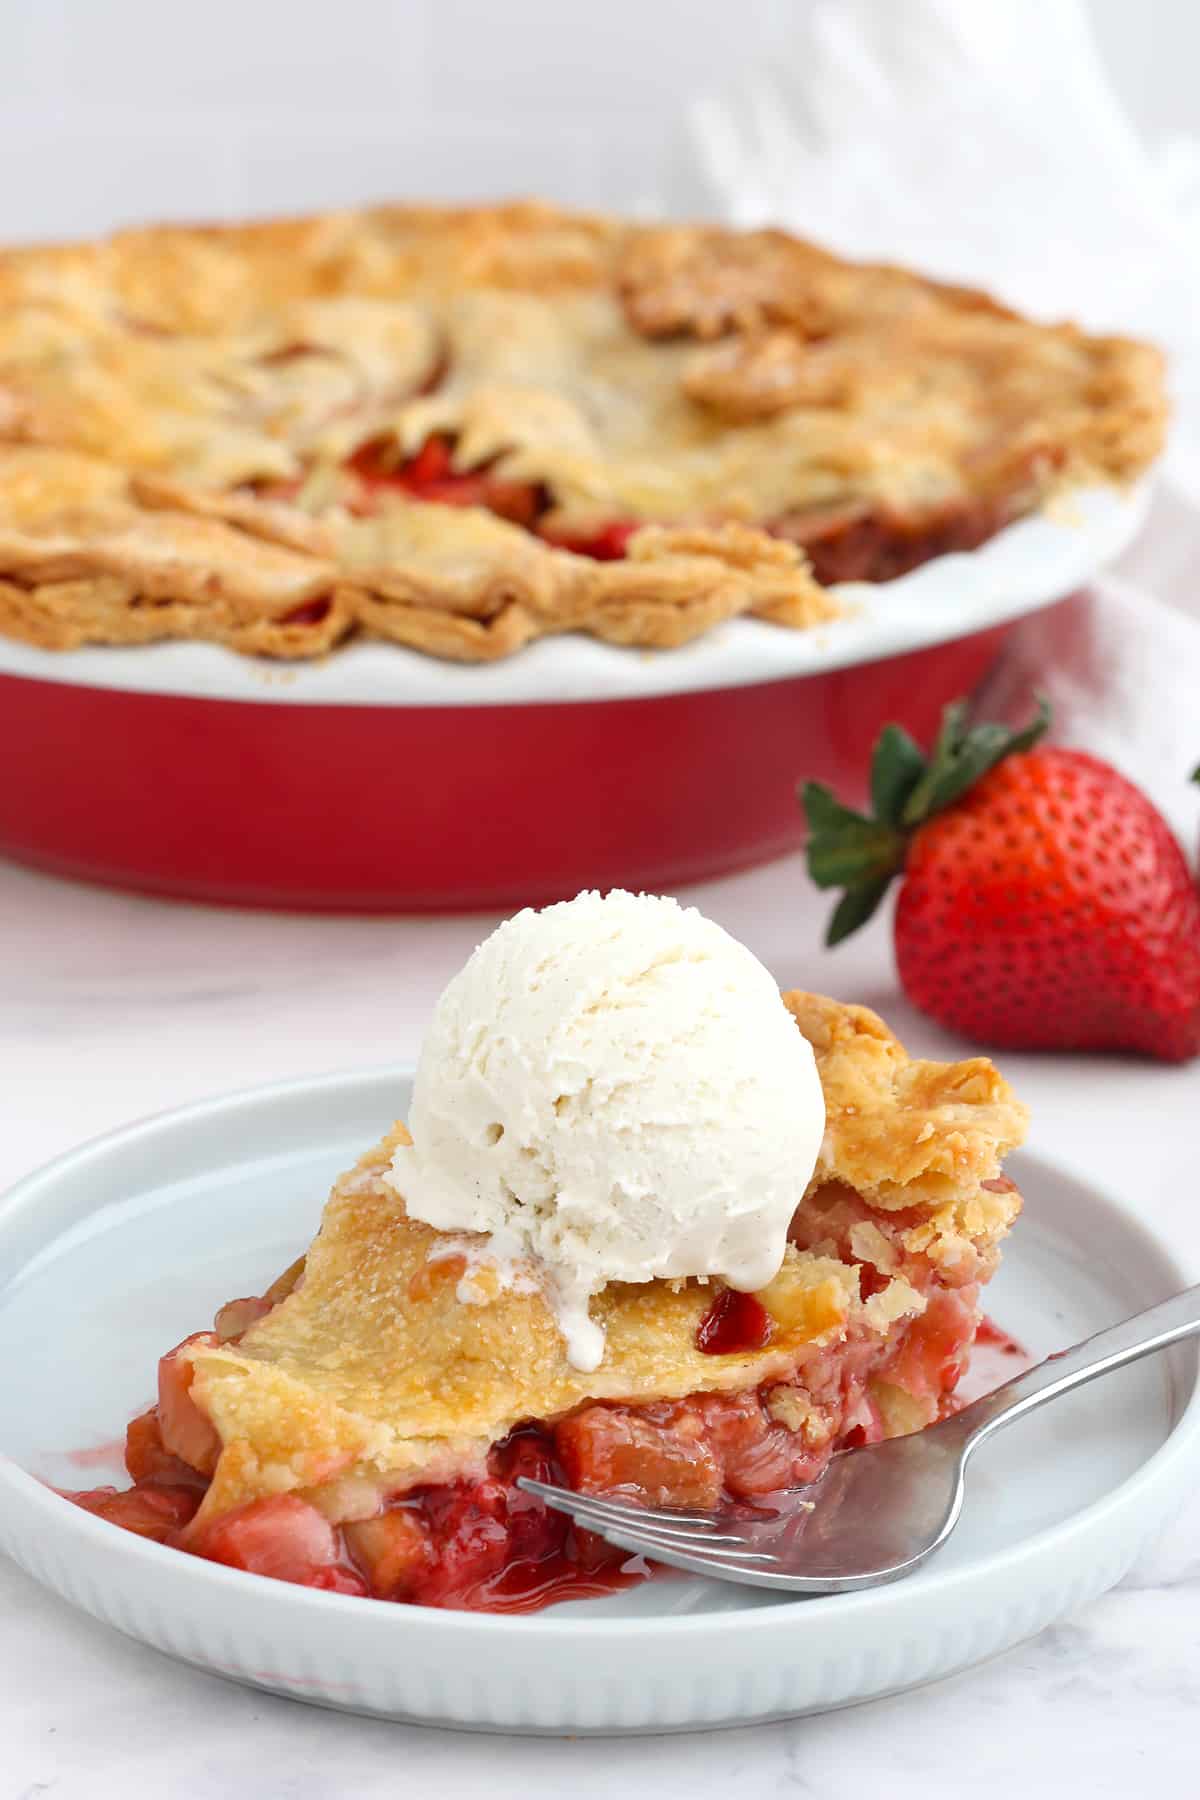 A slice of strawberry rhubarb pie topped with vanilla ice cream on a pale blue serving plate.